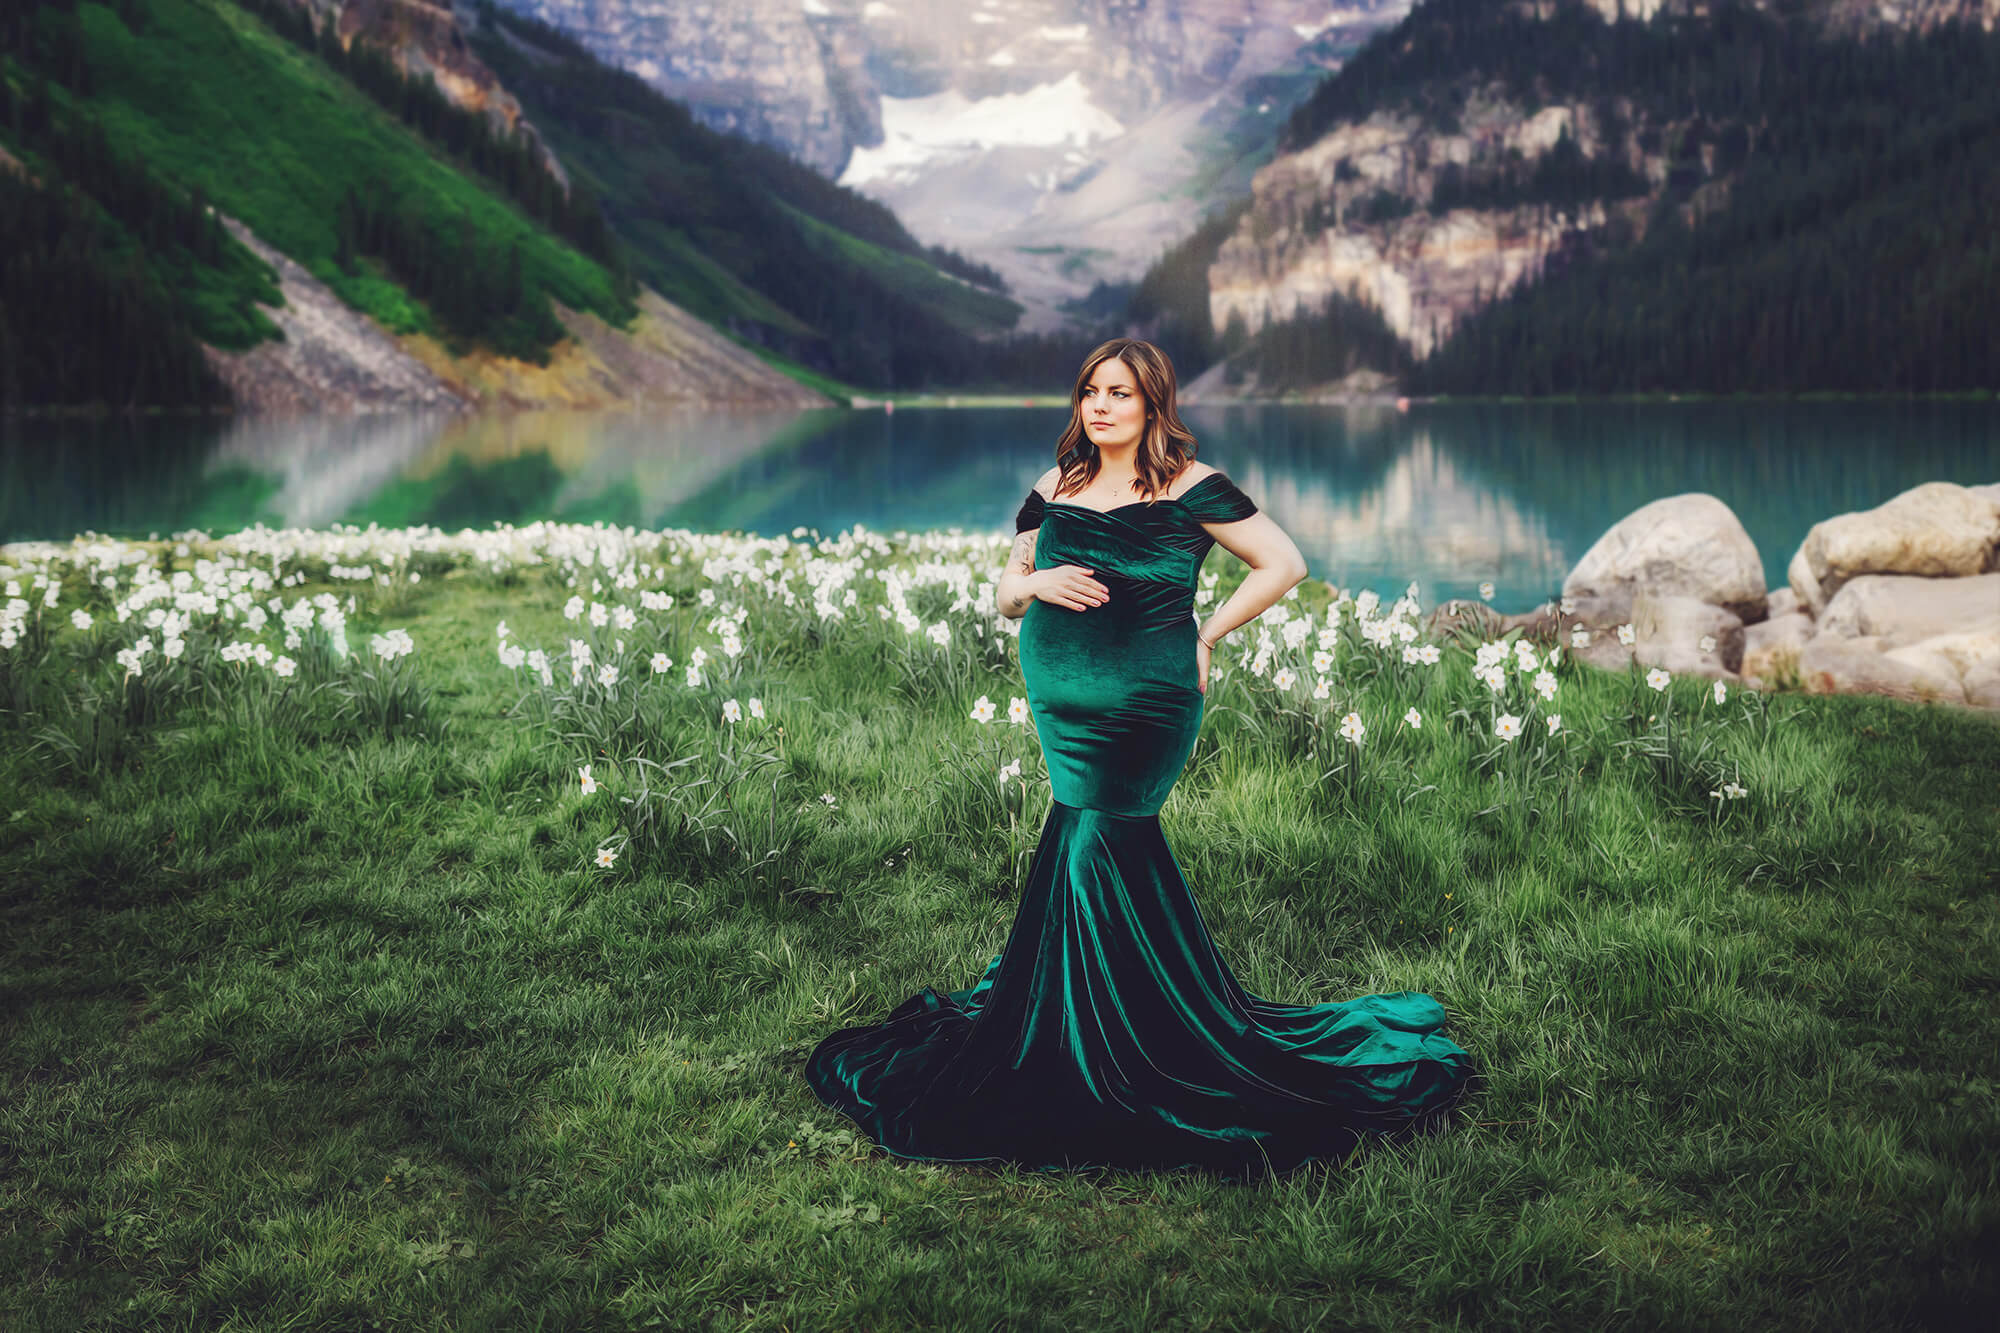 An artistic rendering of Christina during her maternity session with a lake in the background.